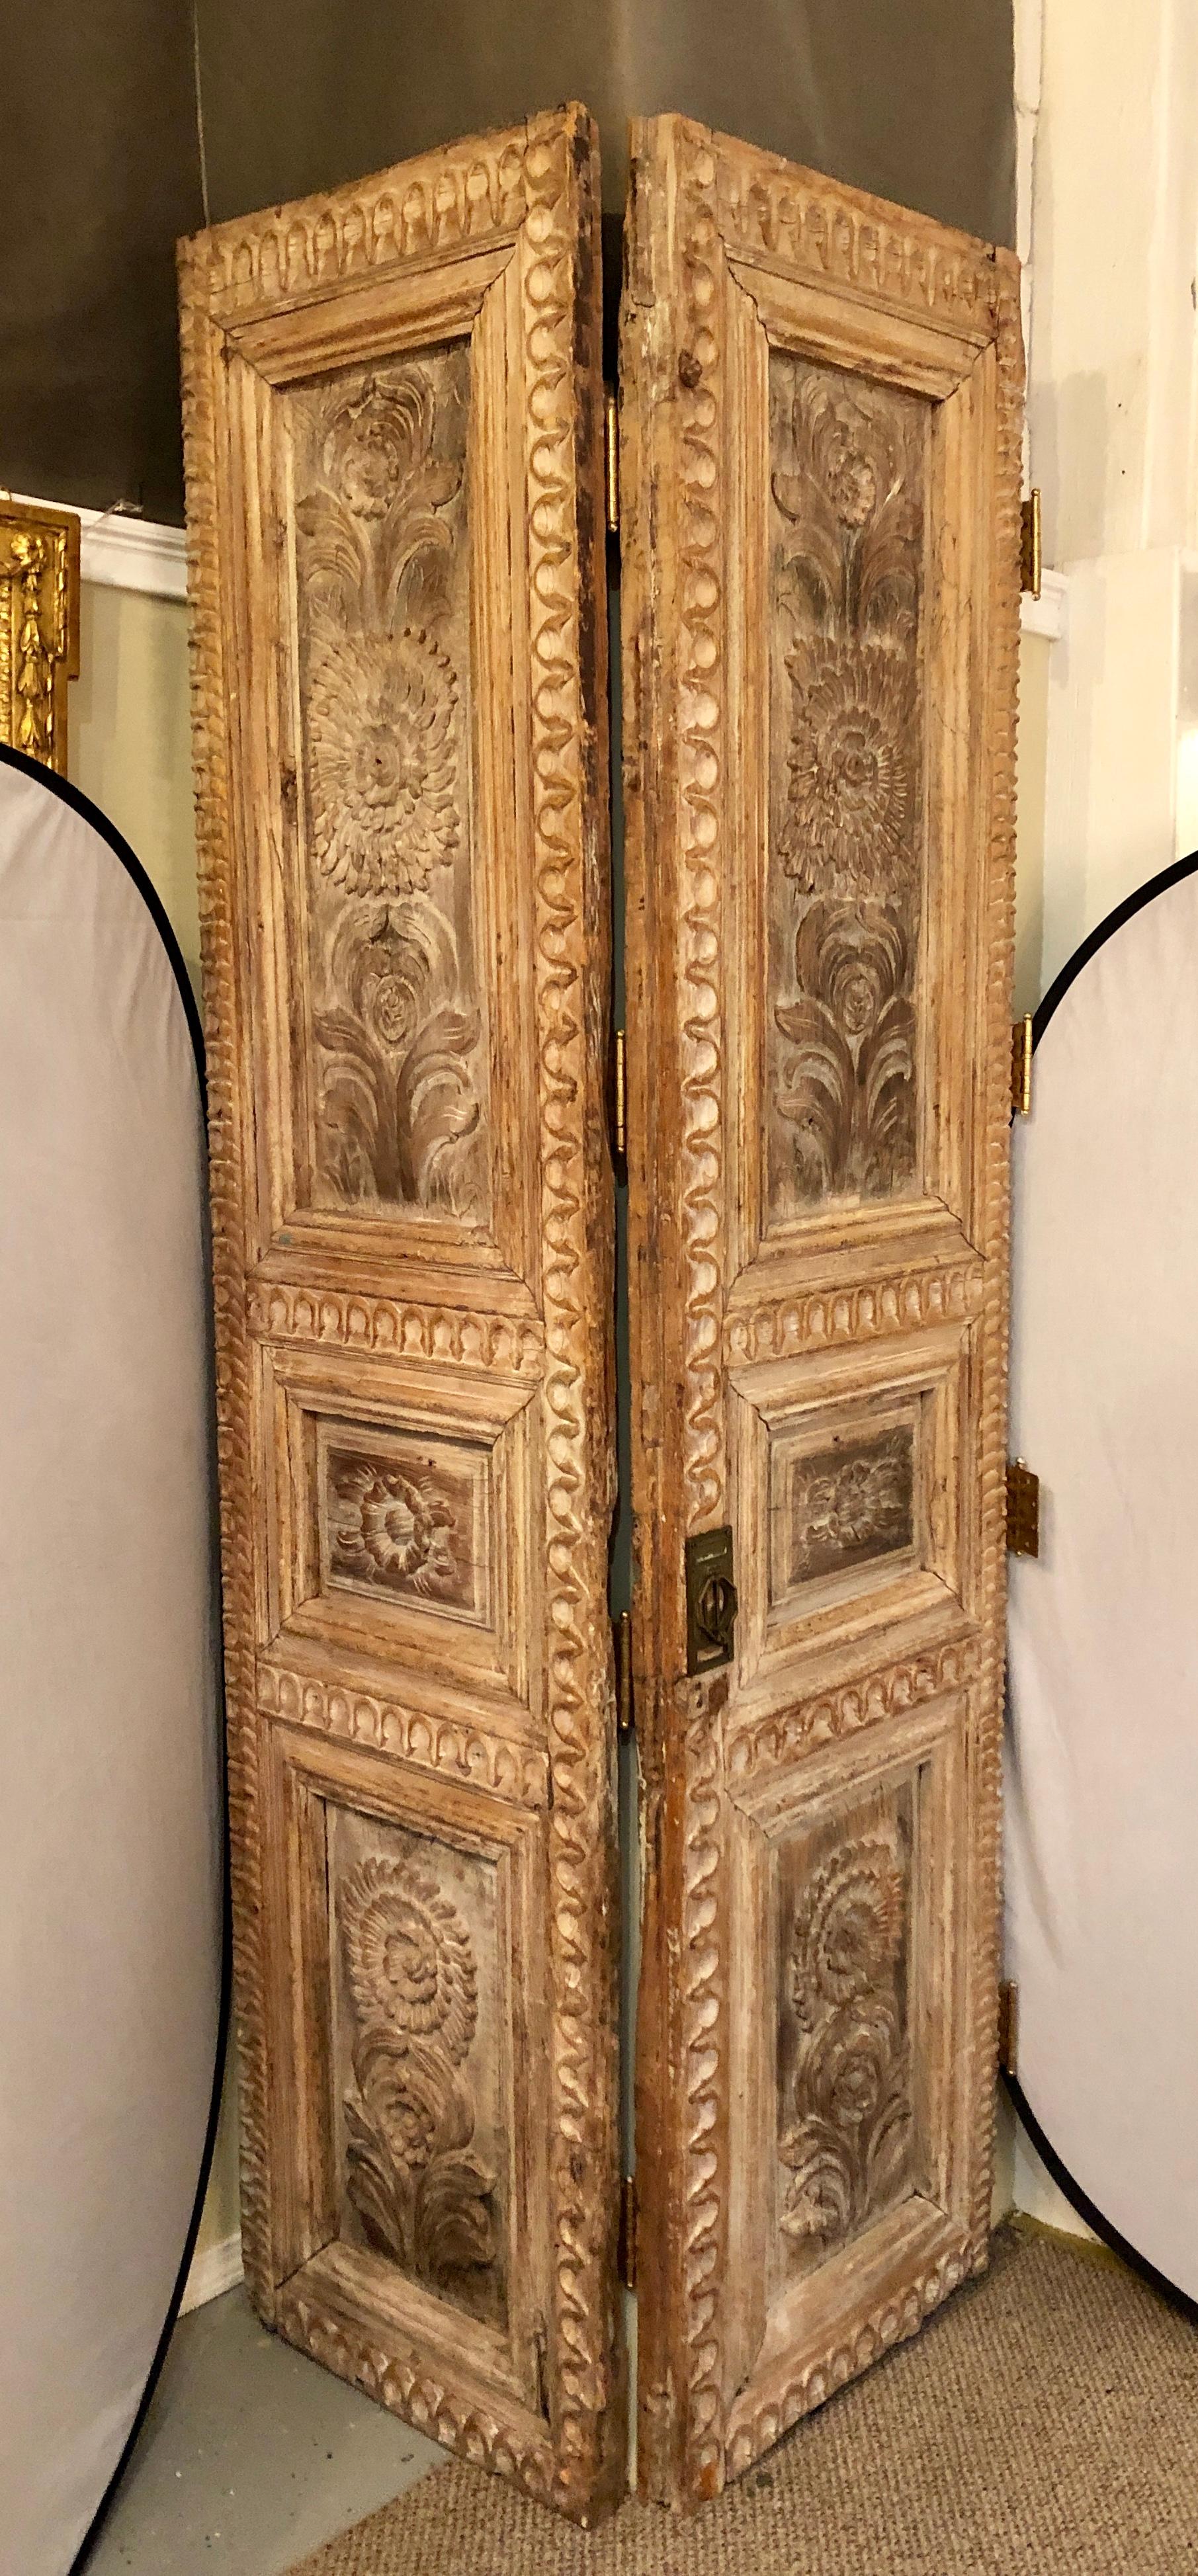 Pair of 19th Century Monumental Folk Art Doorways Mounted as Room Divider In Good Condition For Sale In Stamford, CT